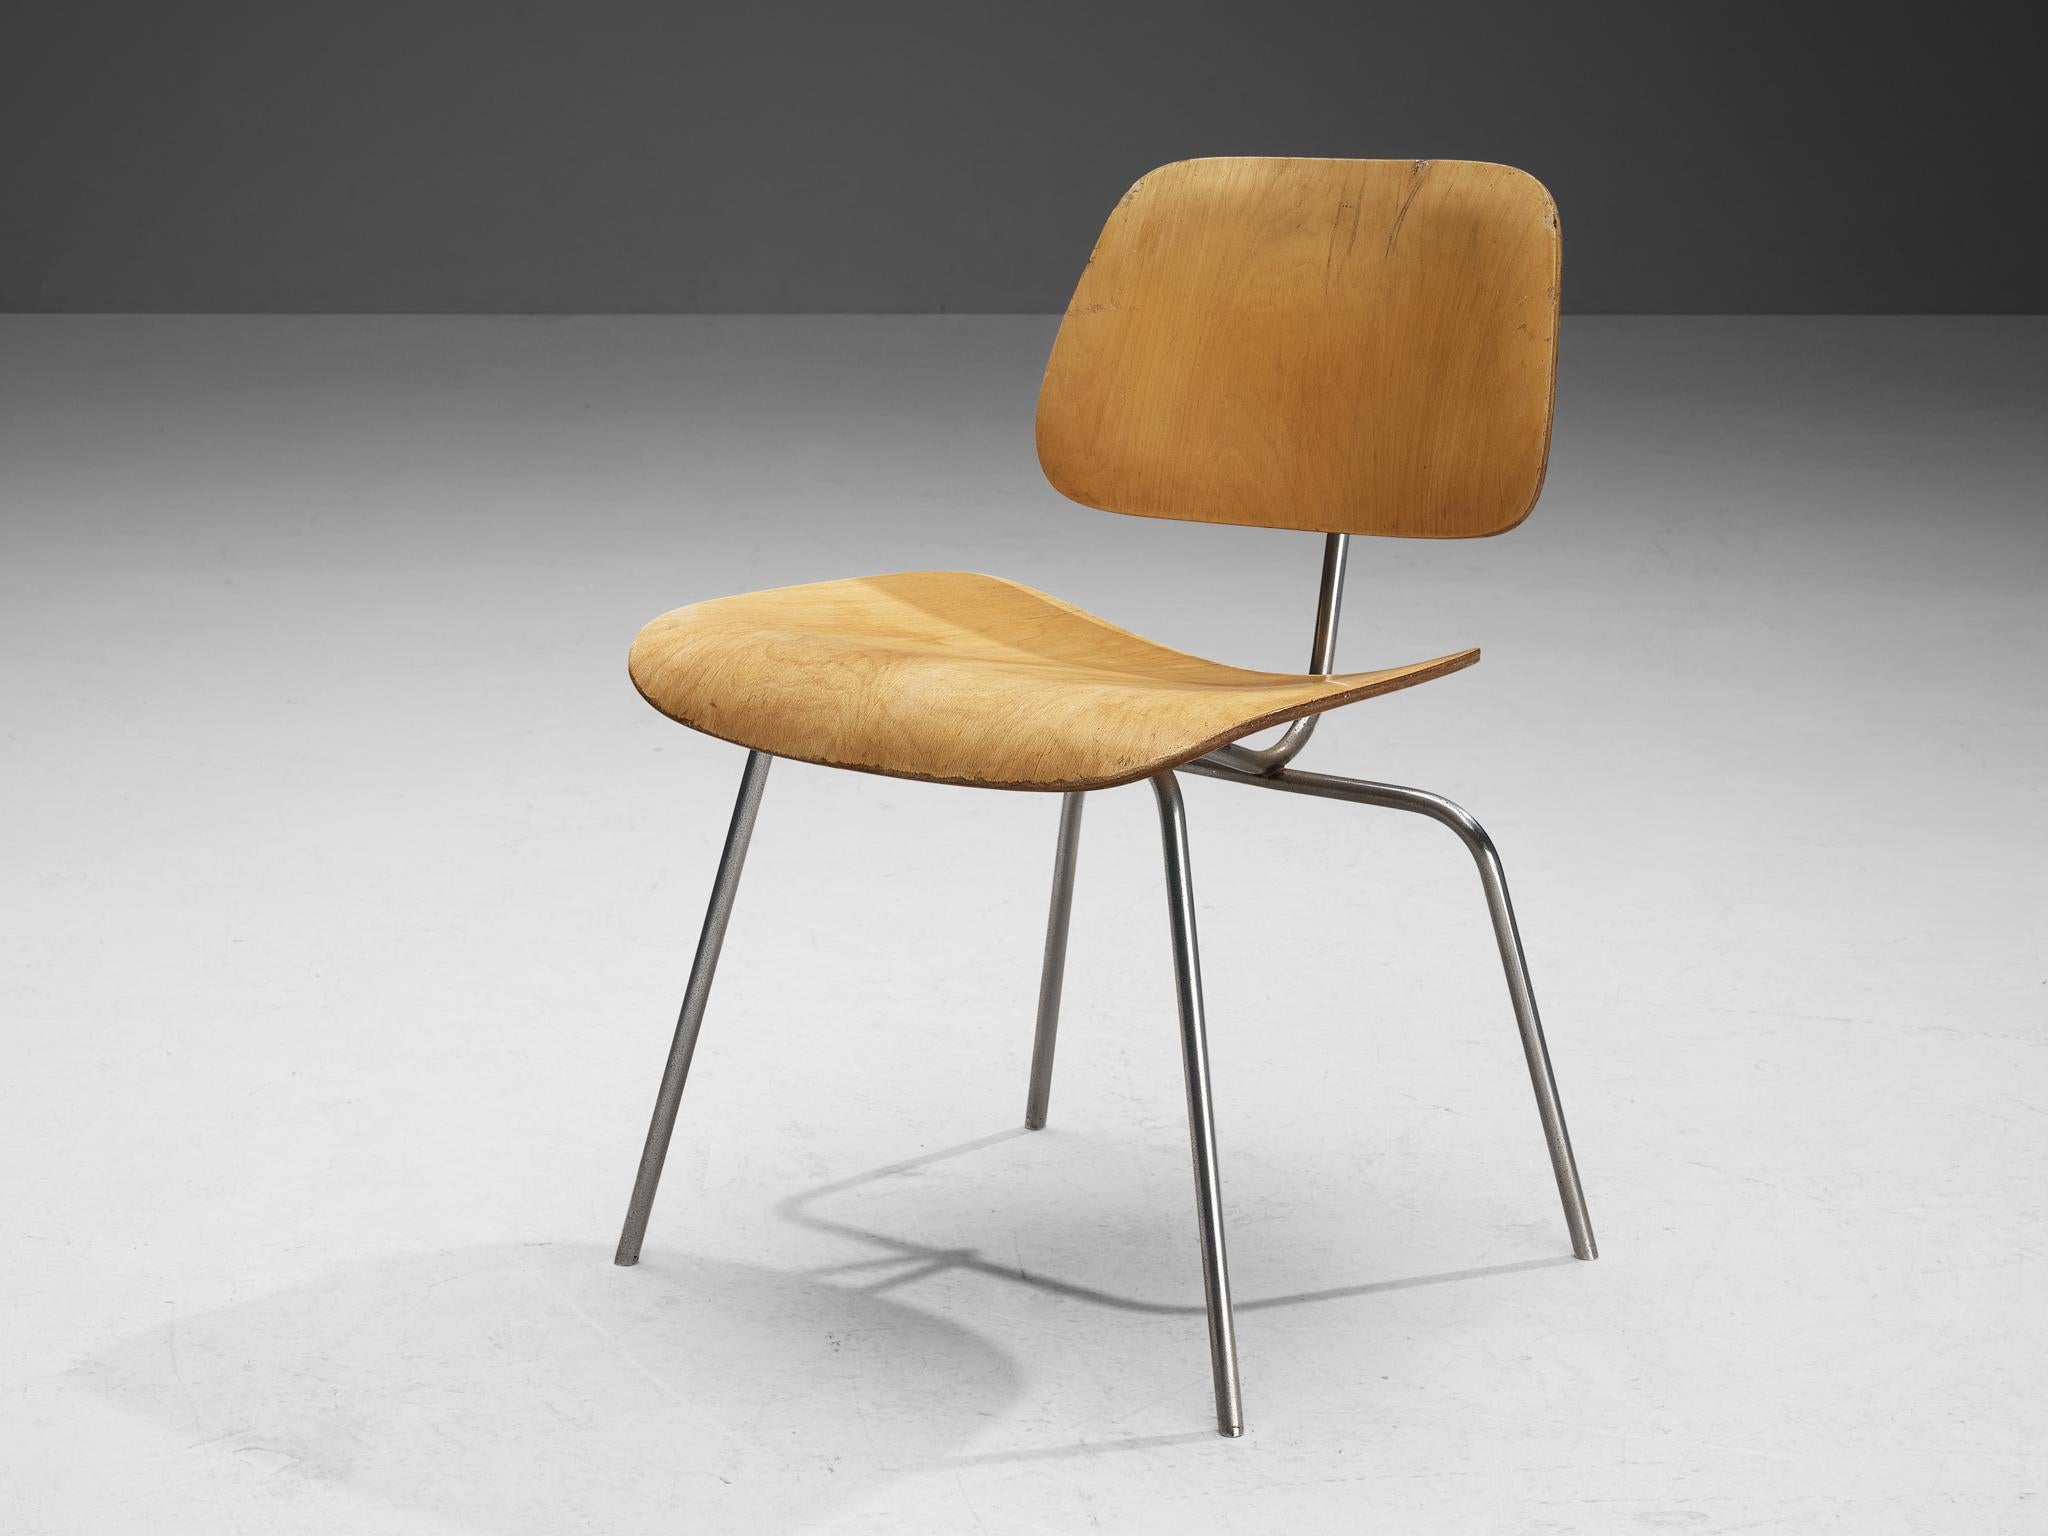 Charles & Ray Eames for Herman Miller, chair, plywood, United States, design 1946.

Classic DCM (Dining Chair Metal) by Charles and Ray Eames with birch plywood seat and back. The DCM arose in 1946 from experimenting with moulding plywood in